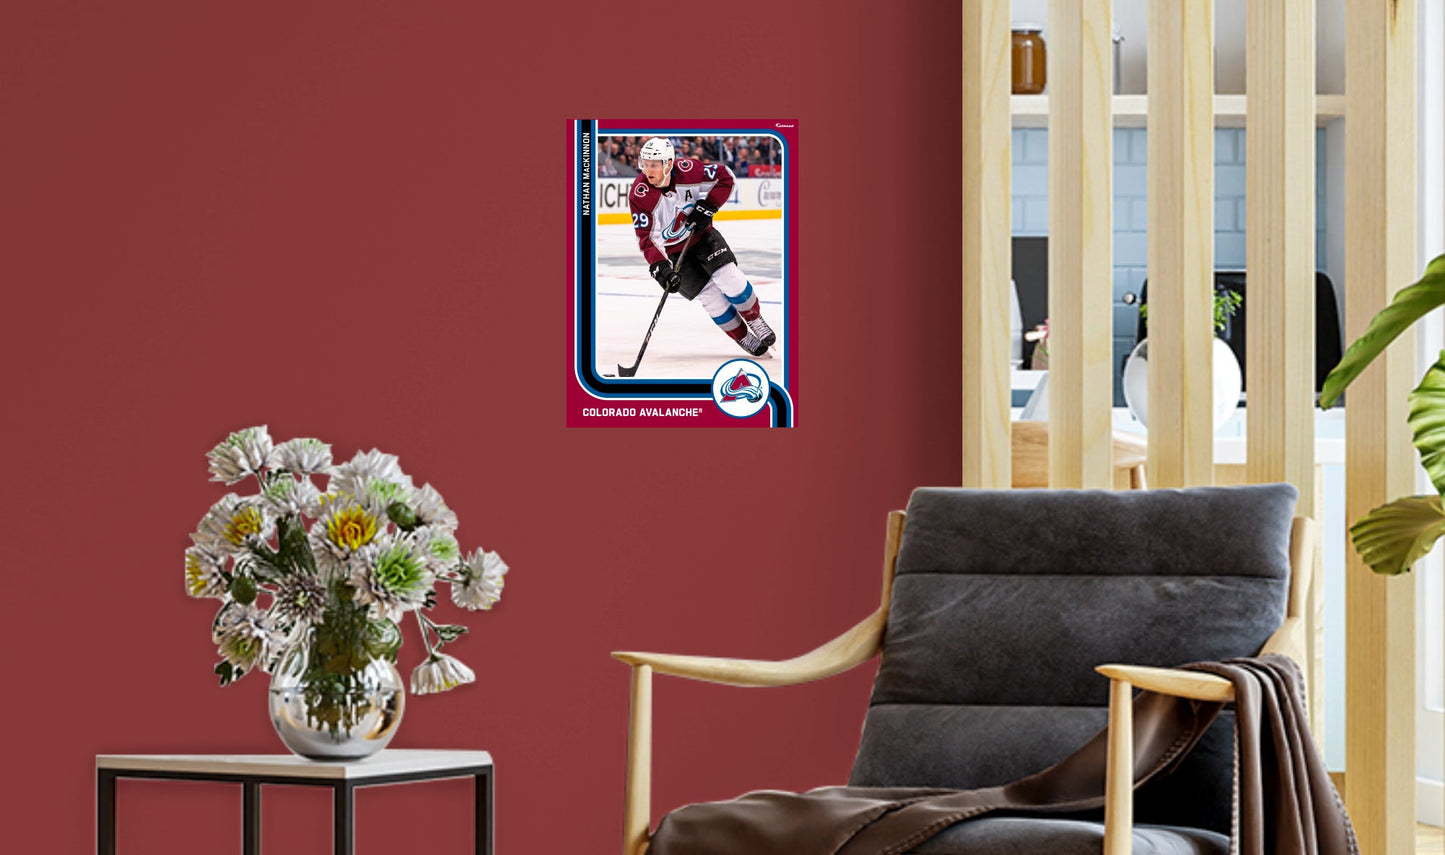 Colorado Avalanche: Nathan MacKinnon Poster - Officially Licensed NHL Removable Adhesive Decal